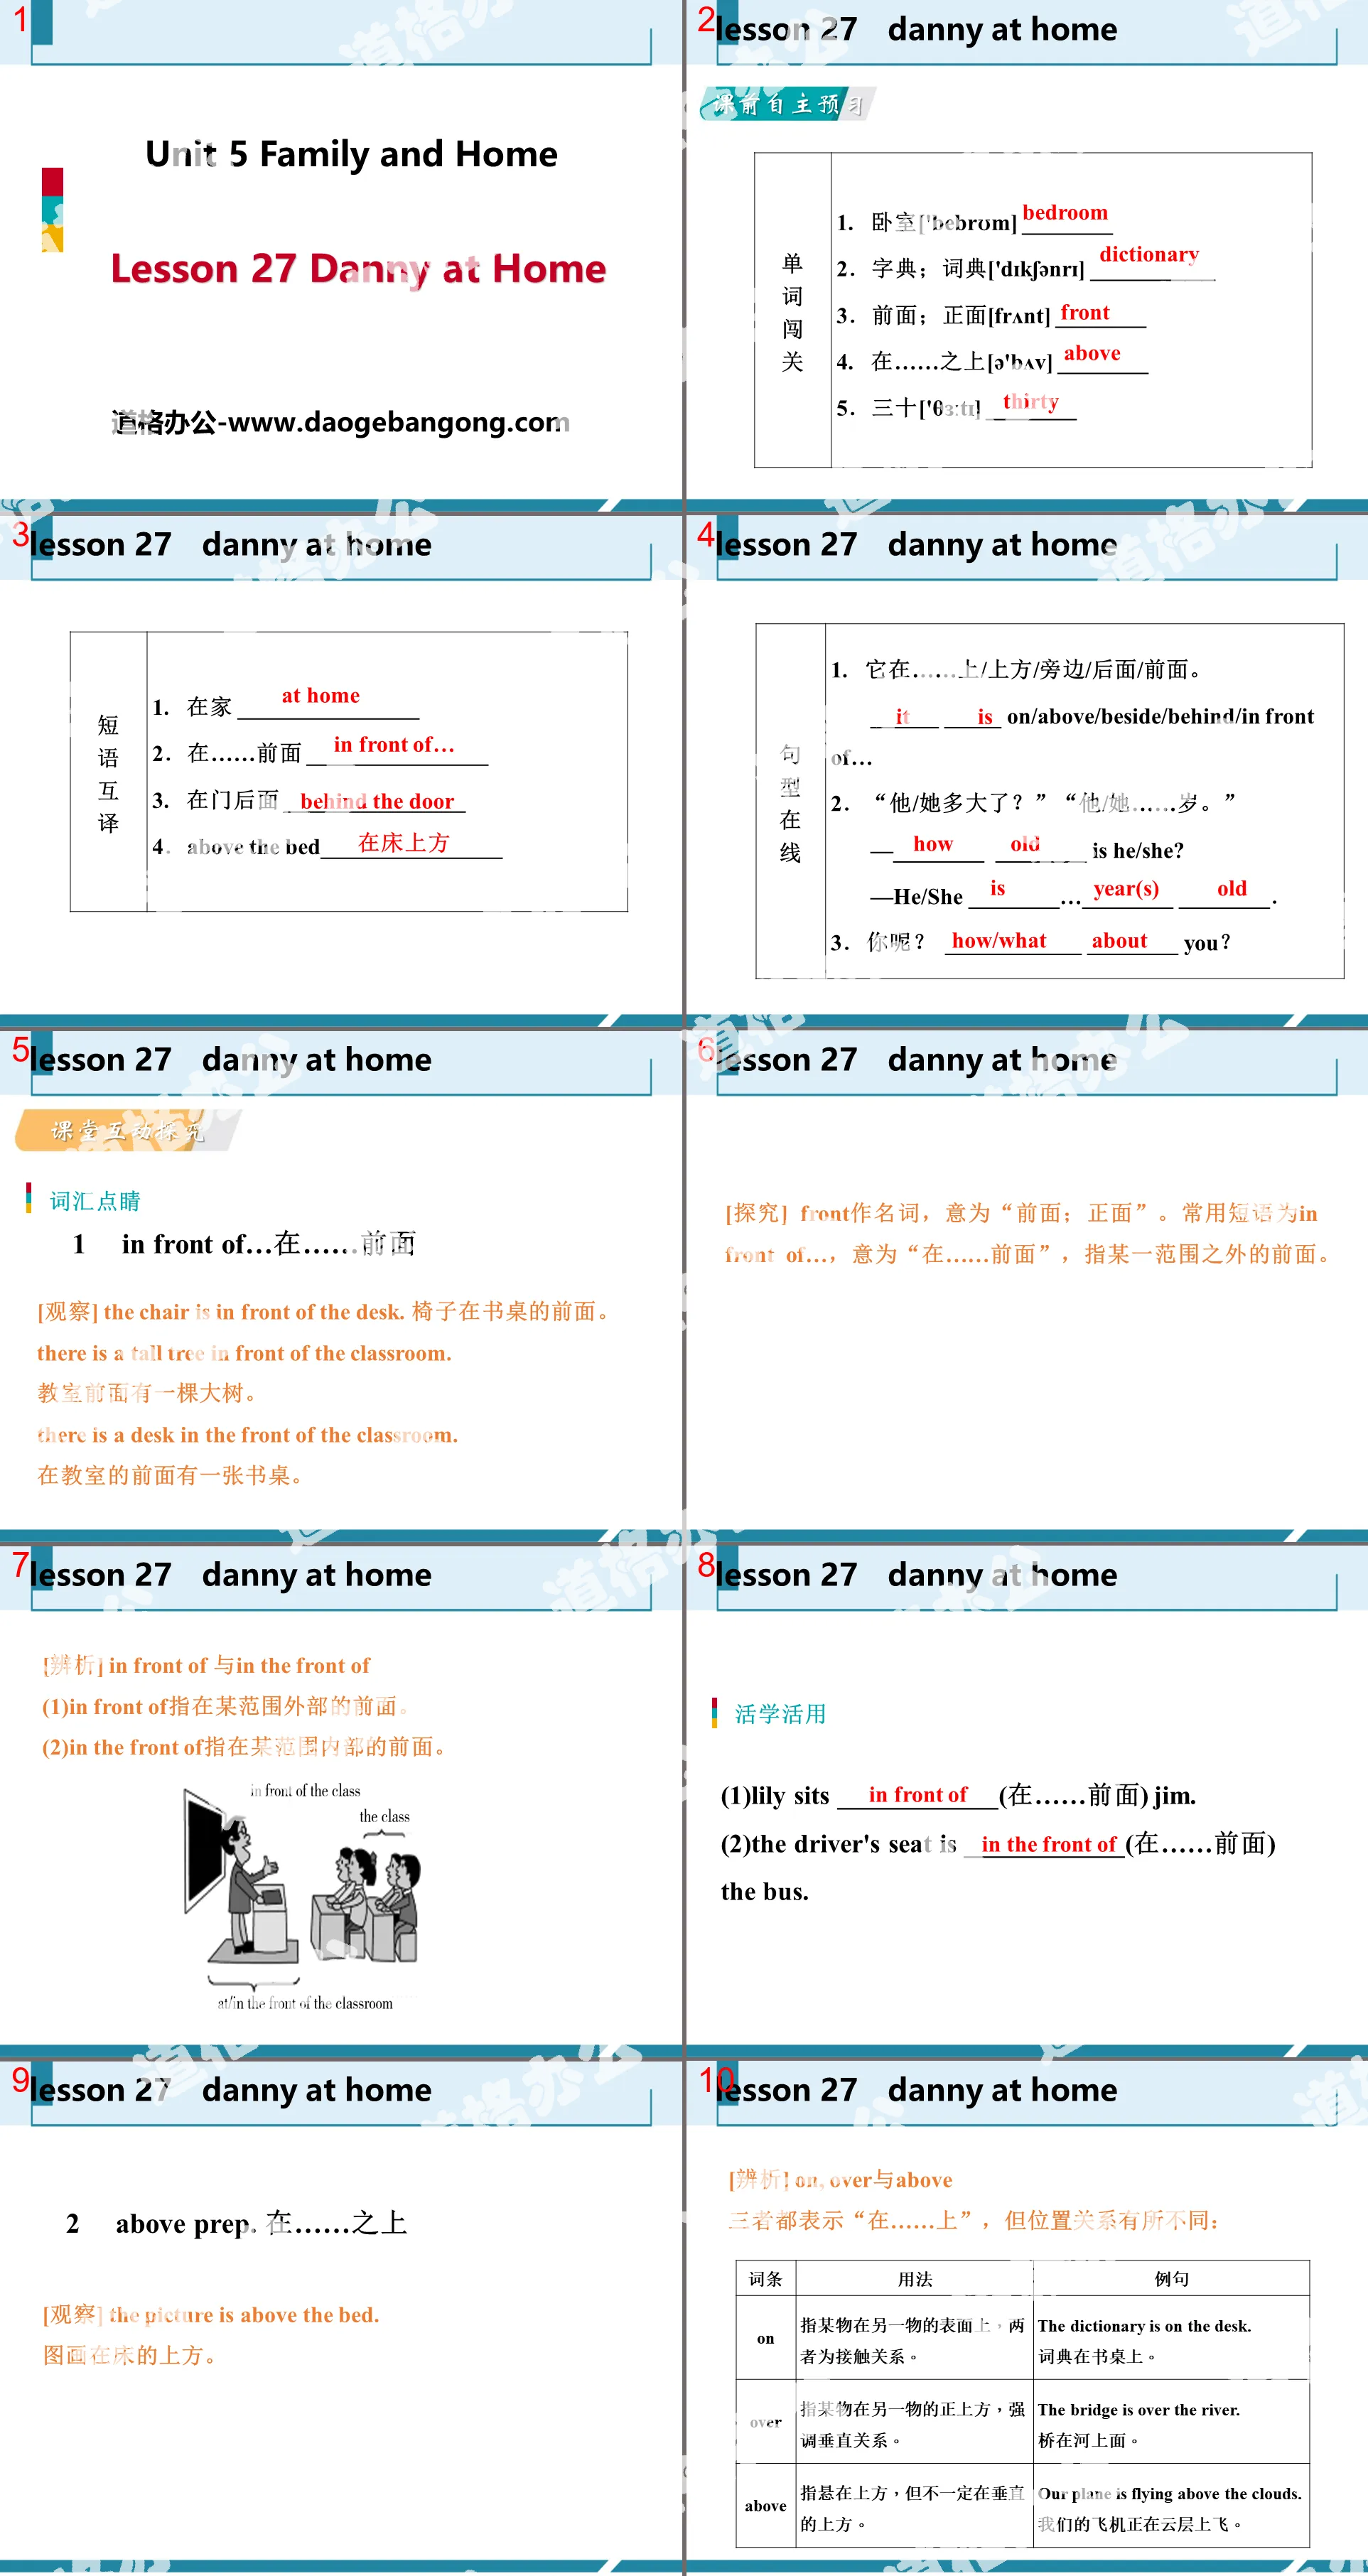 《Danny at Home》Family and Home PPT免費課件